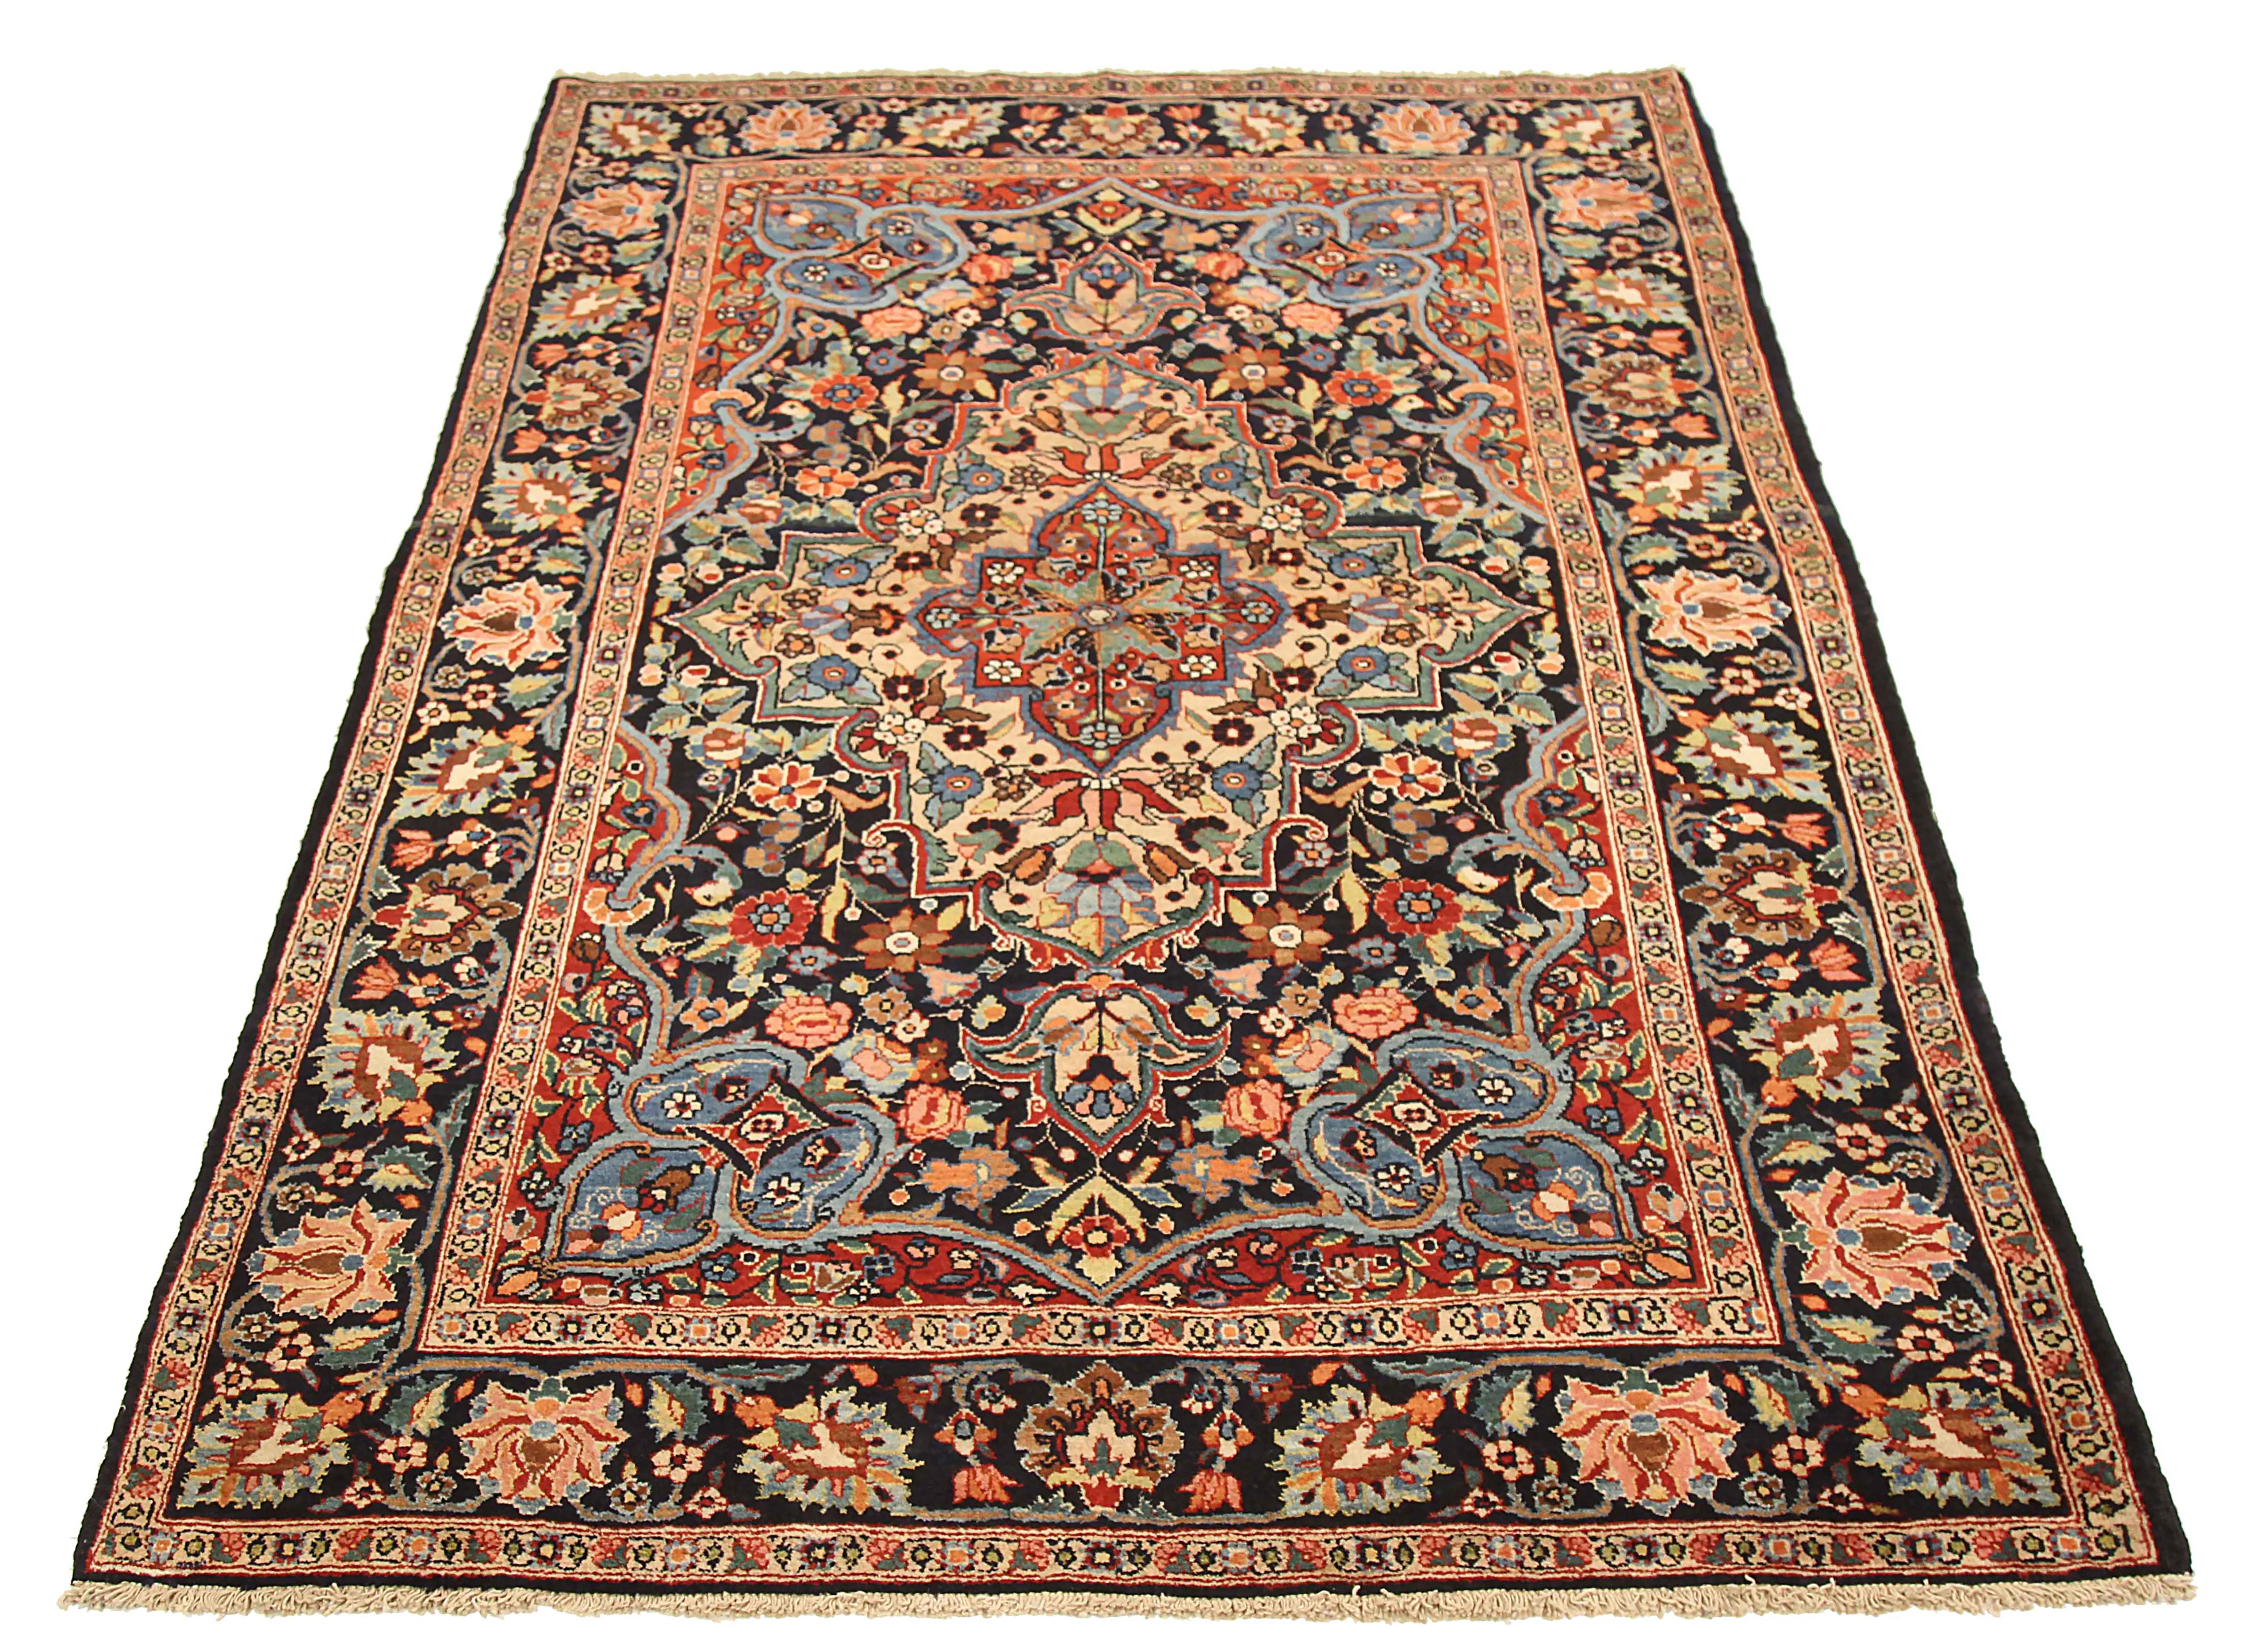 Antique Persian area rug handwoven from the finest sheep’s wool. It’s colored with all-natural vegetable dyes that are safe for humans and pets. It’s a traditional Kermanshah design handwoven by expert artisans. It’s a lovely area rug that can be